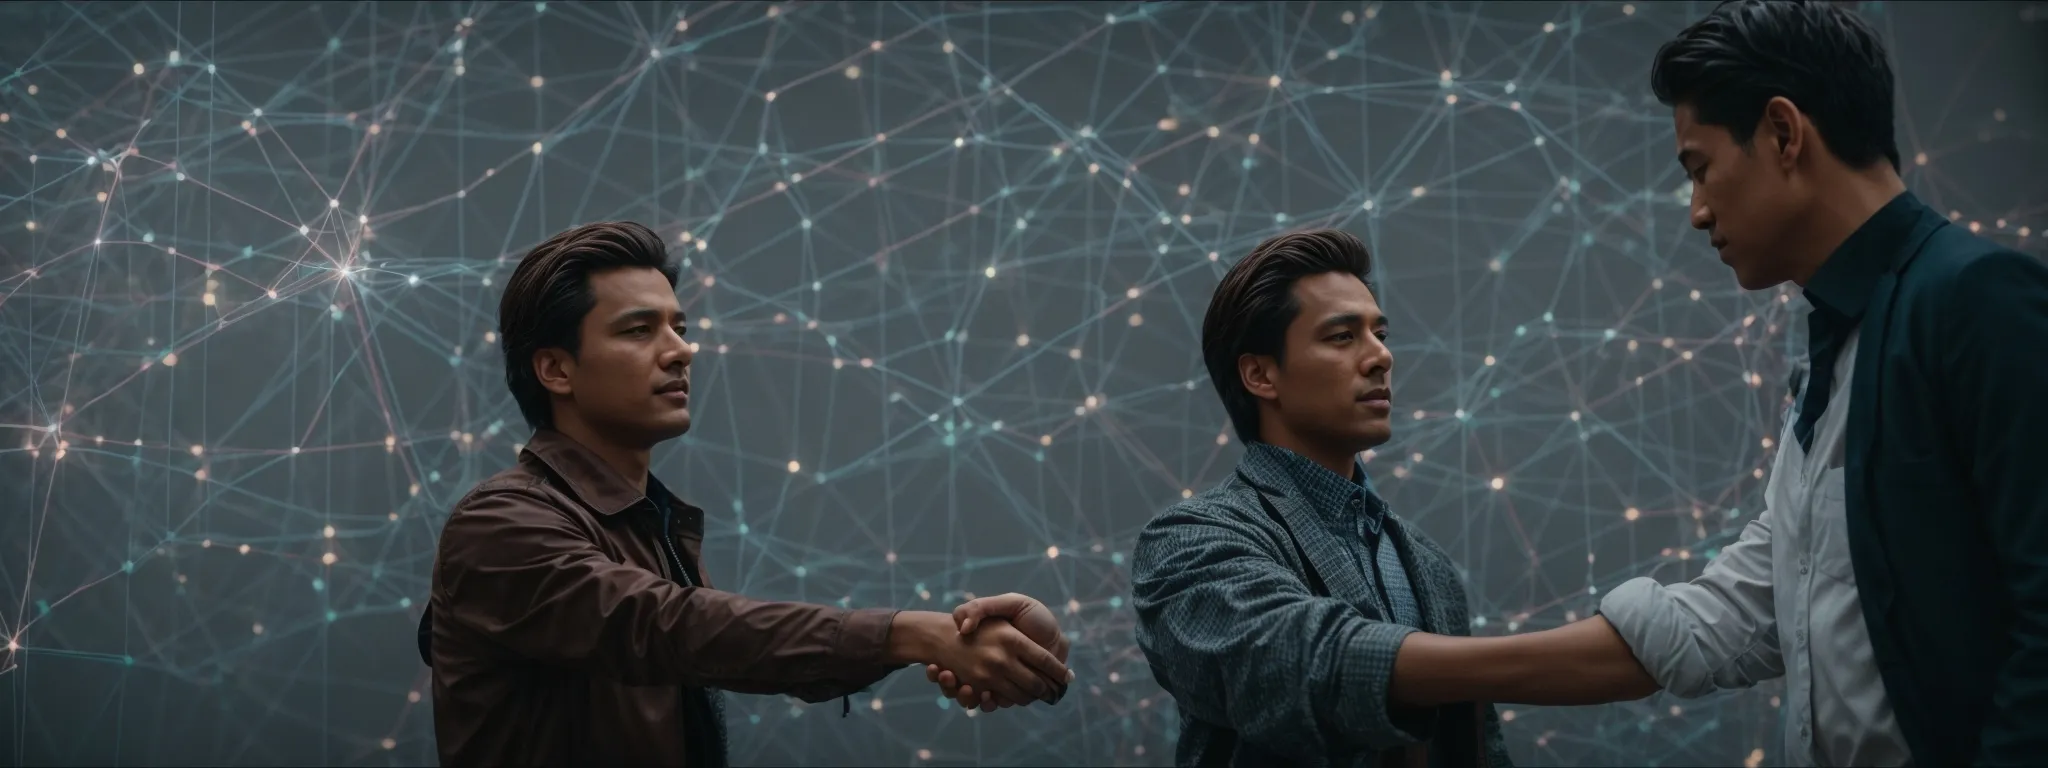 two professionals shaking hands in front of a network diagram on a digital screen.